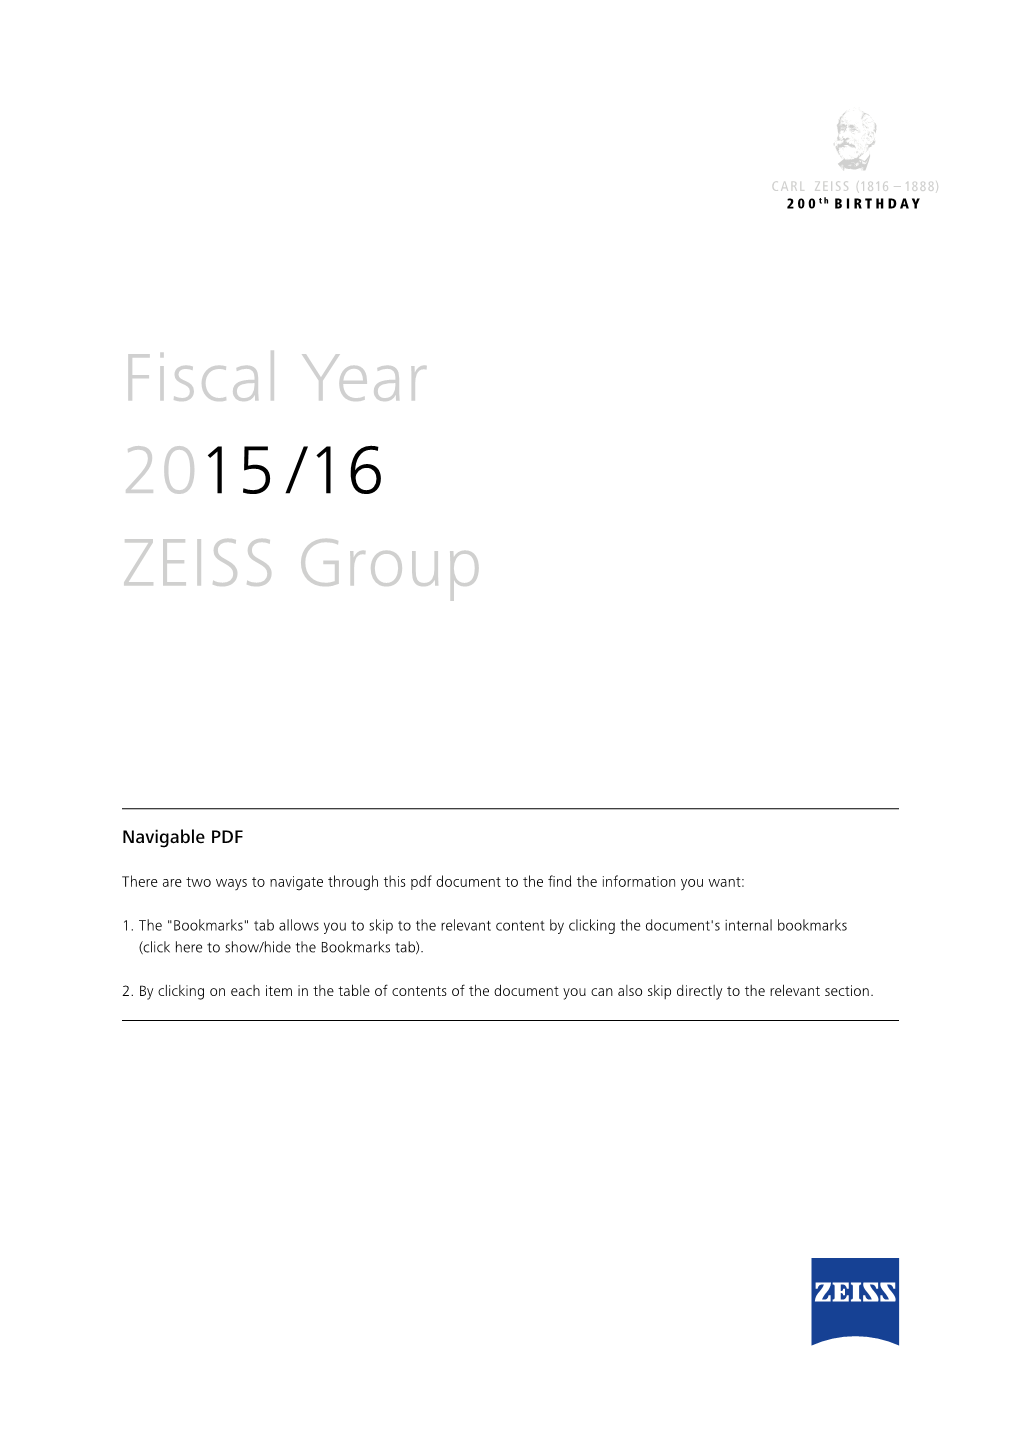 Fiscal Year 2015 /16 ZEISS Group Financial Highlights (Ifrss)